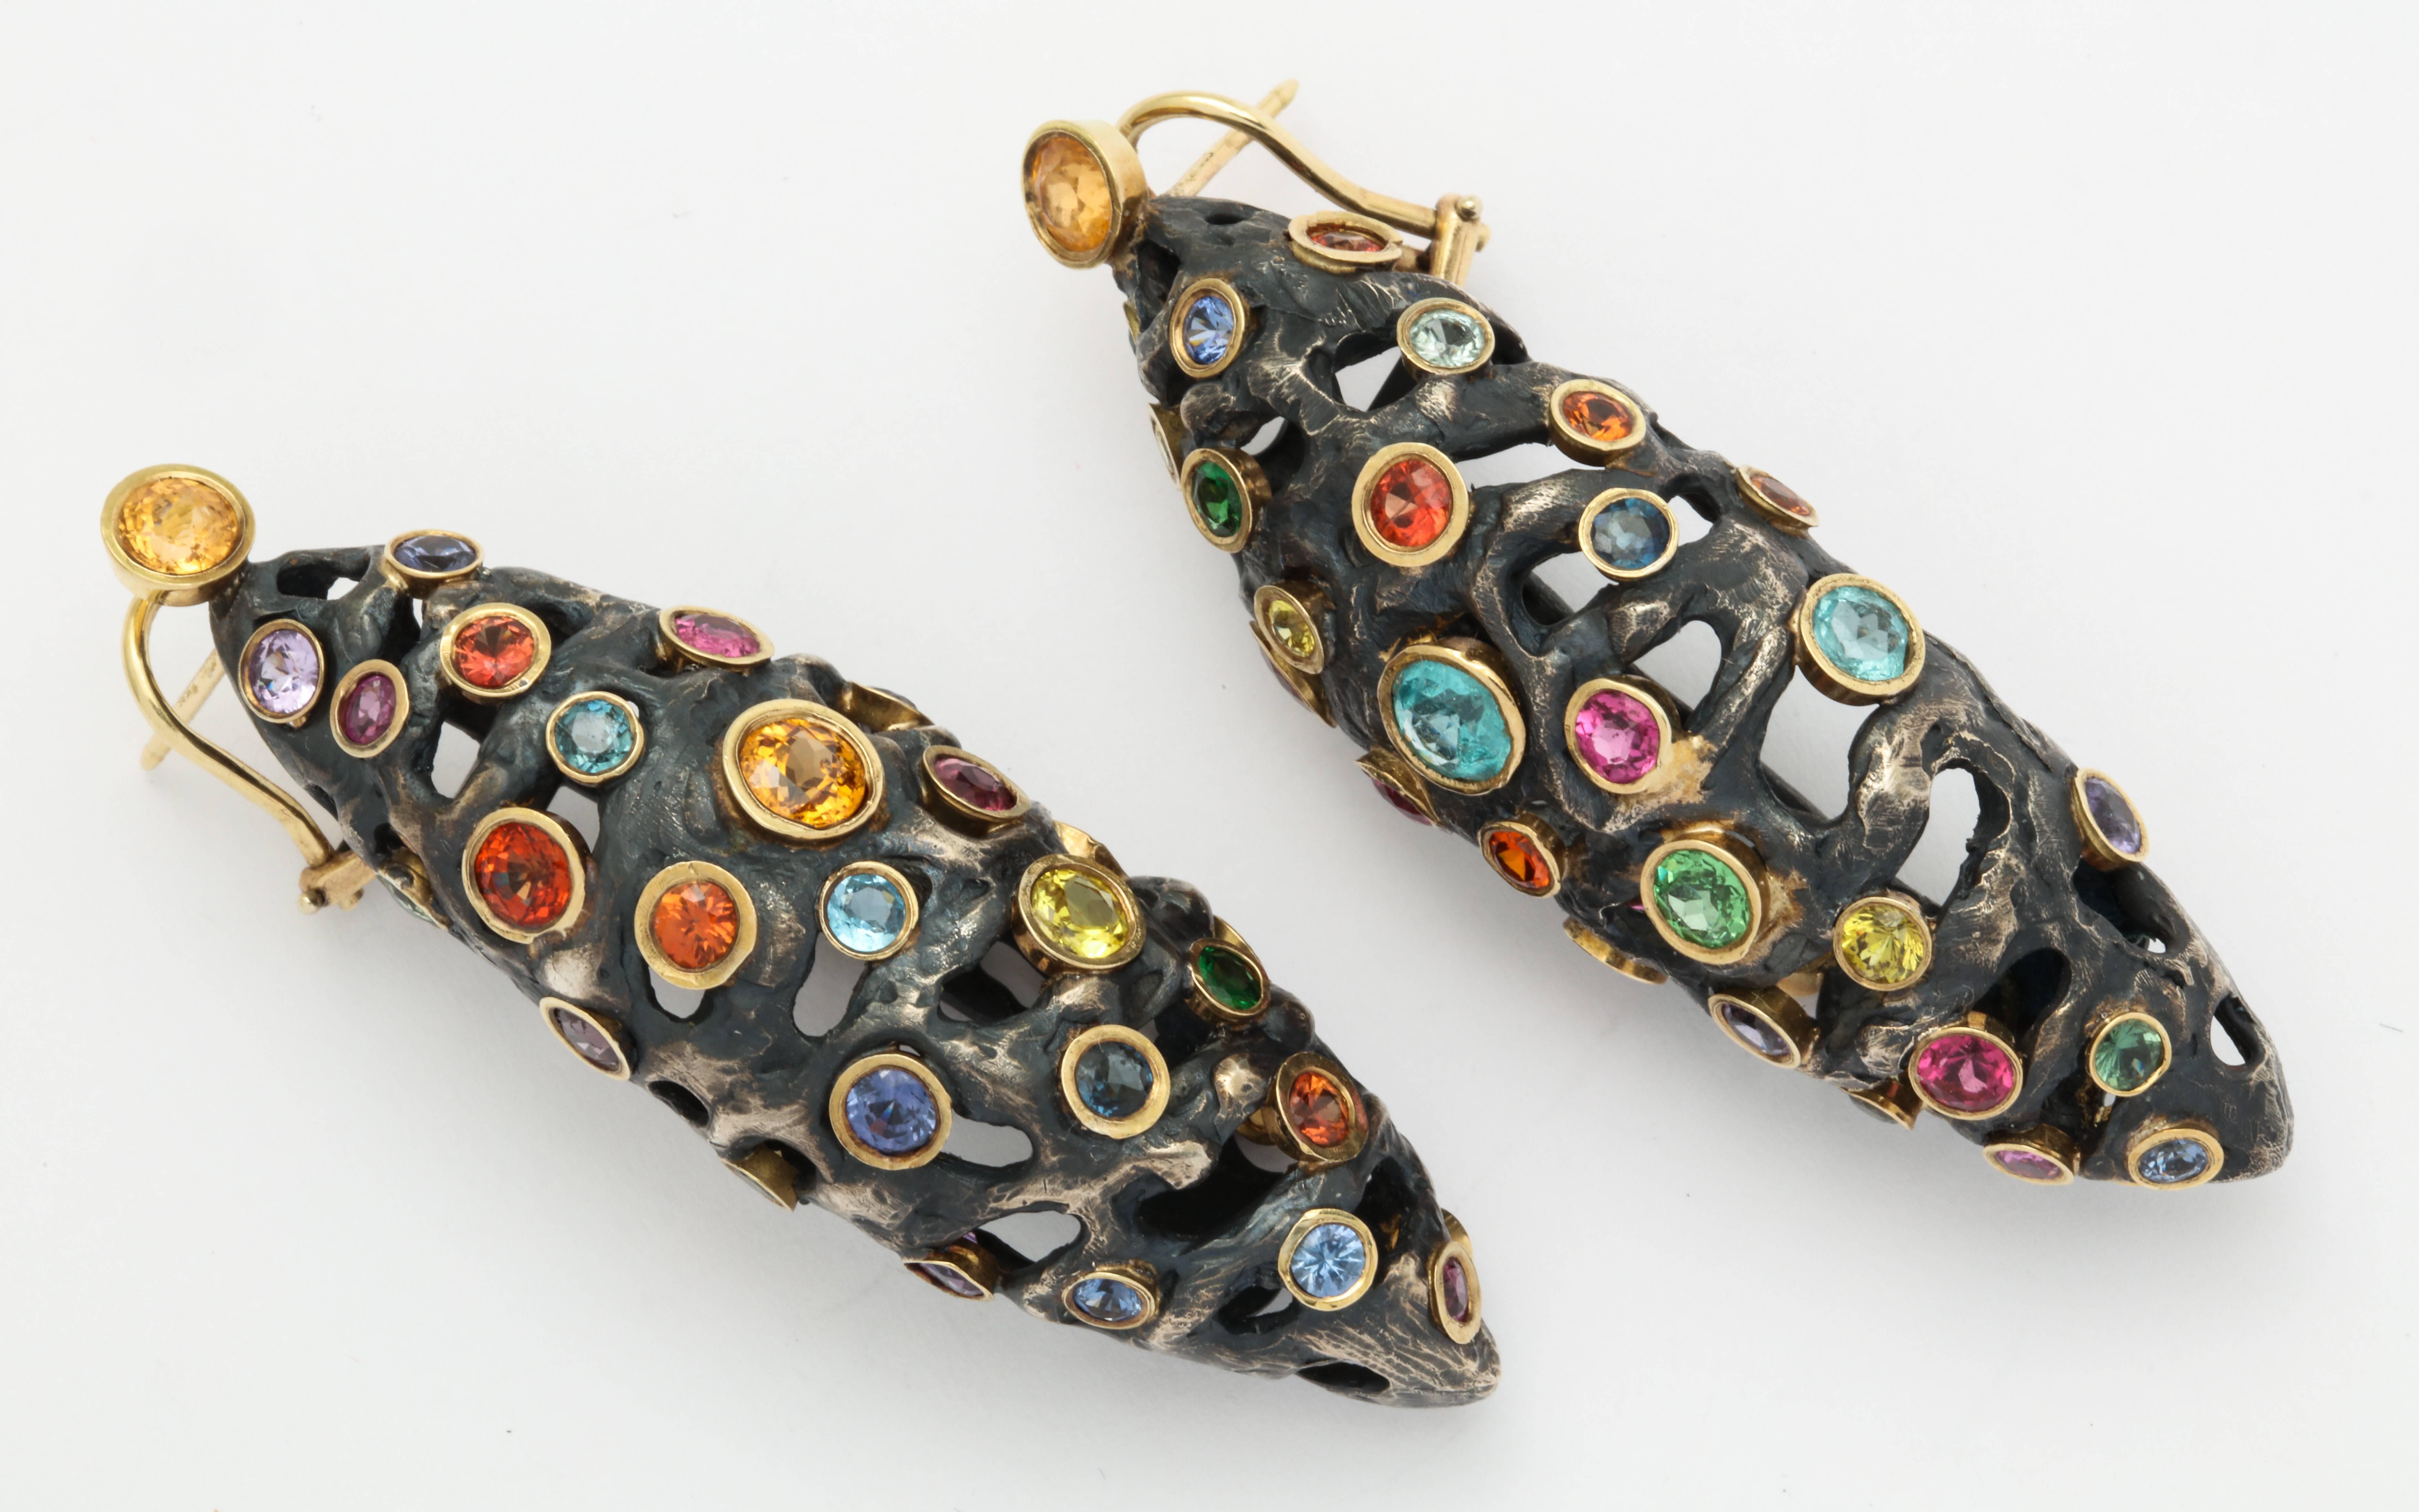 Set with a variety of brightly colored gemstones including sapphire, citrine, amethyst, topaz and tsavorite, these fantastic earrings are truly one of a kind.  The mounting utilizes Cooperman's signature patinated silver, which lends a dramatic